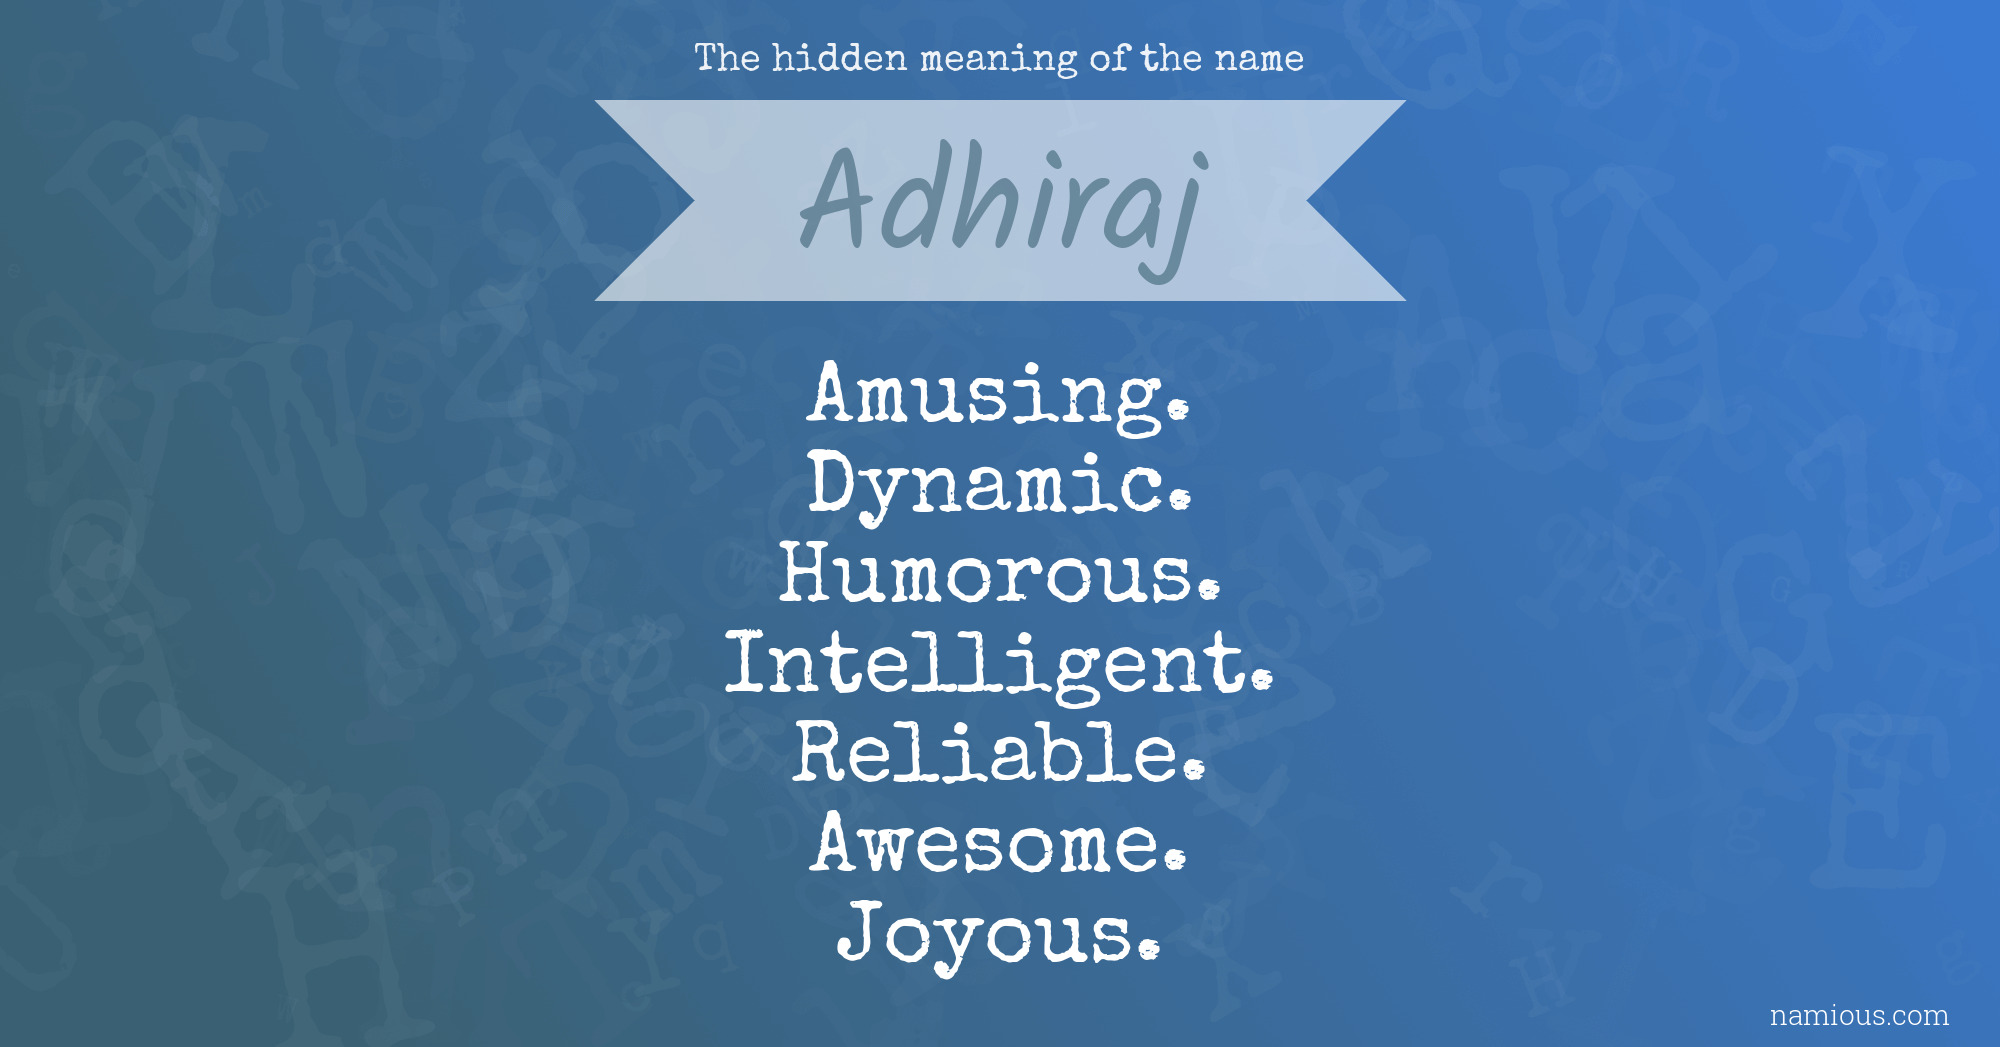 The hidden meaning of the name Adhiraj